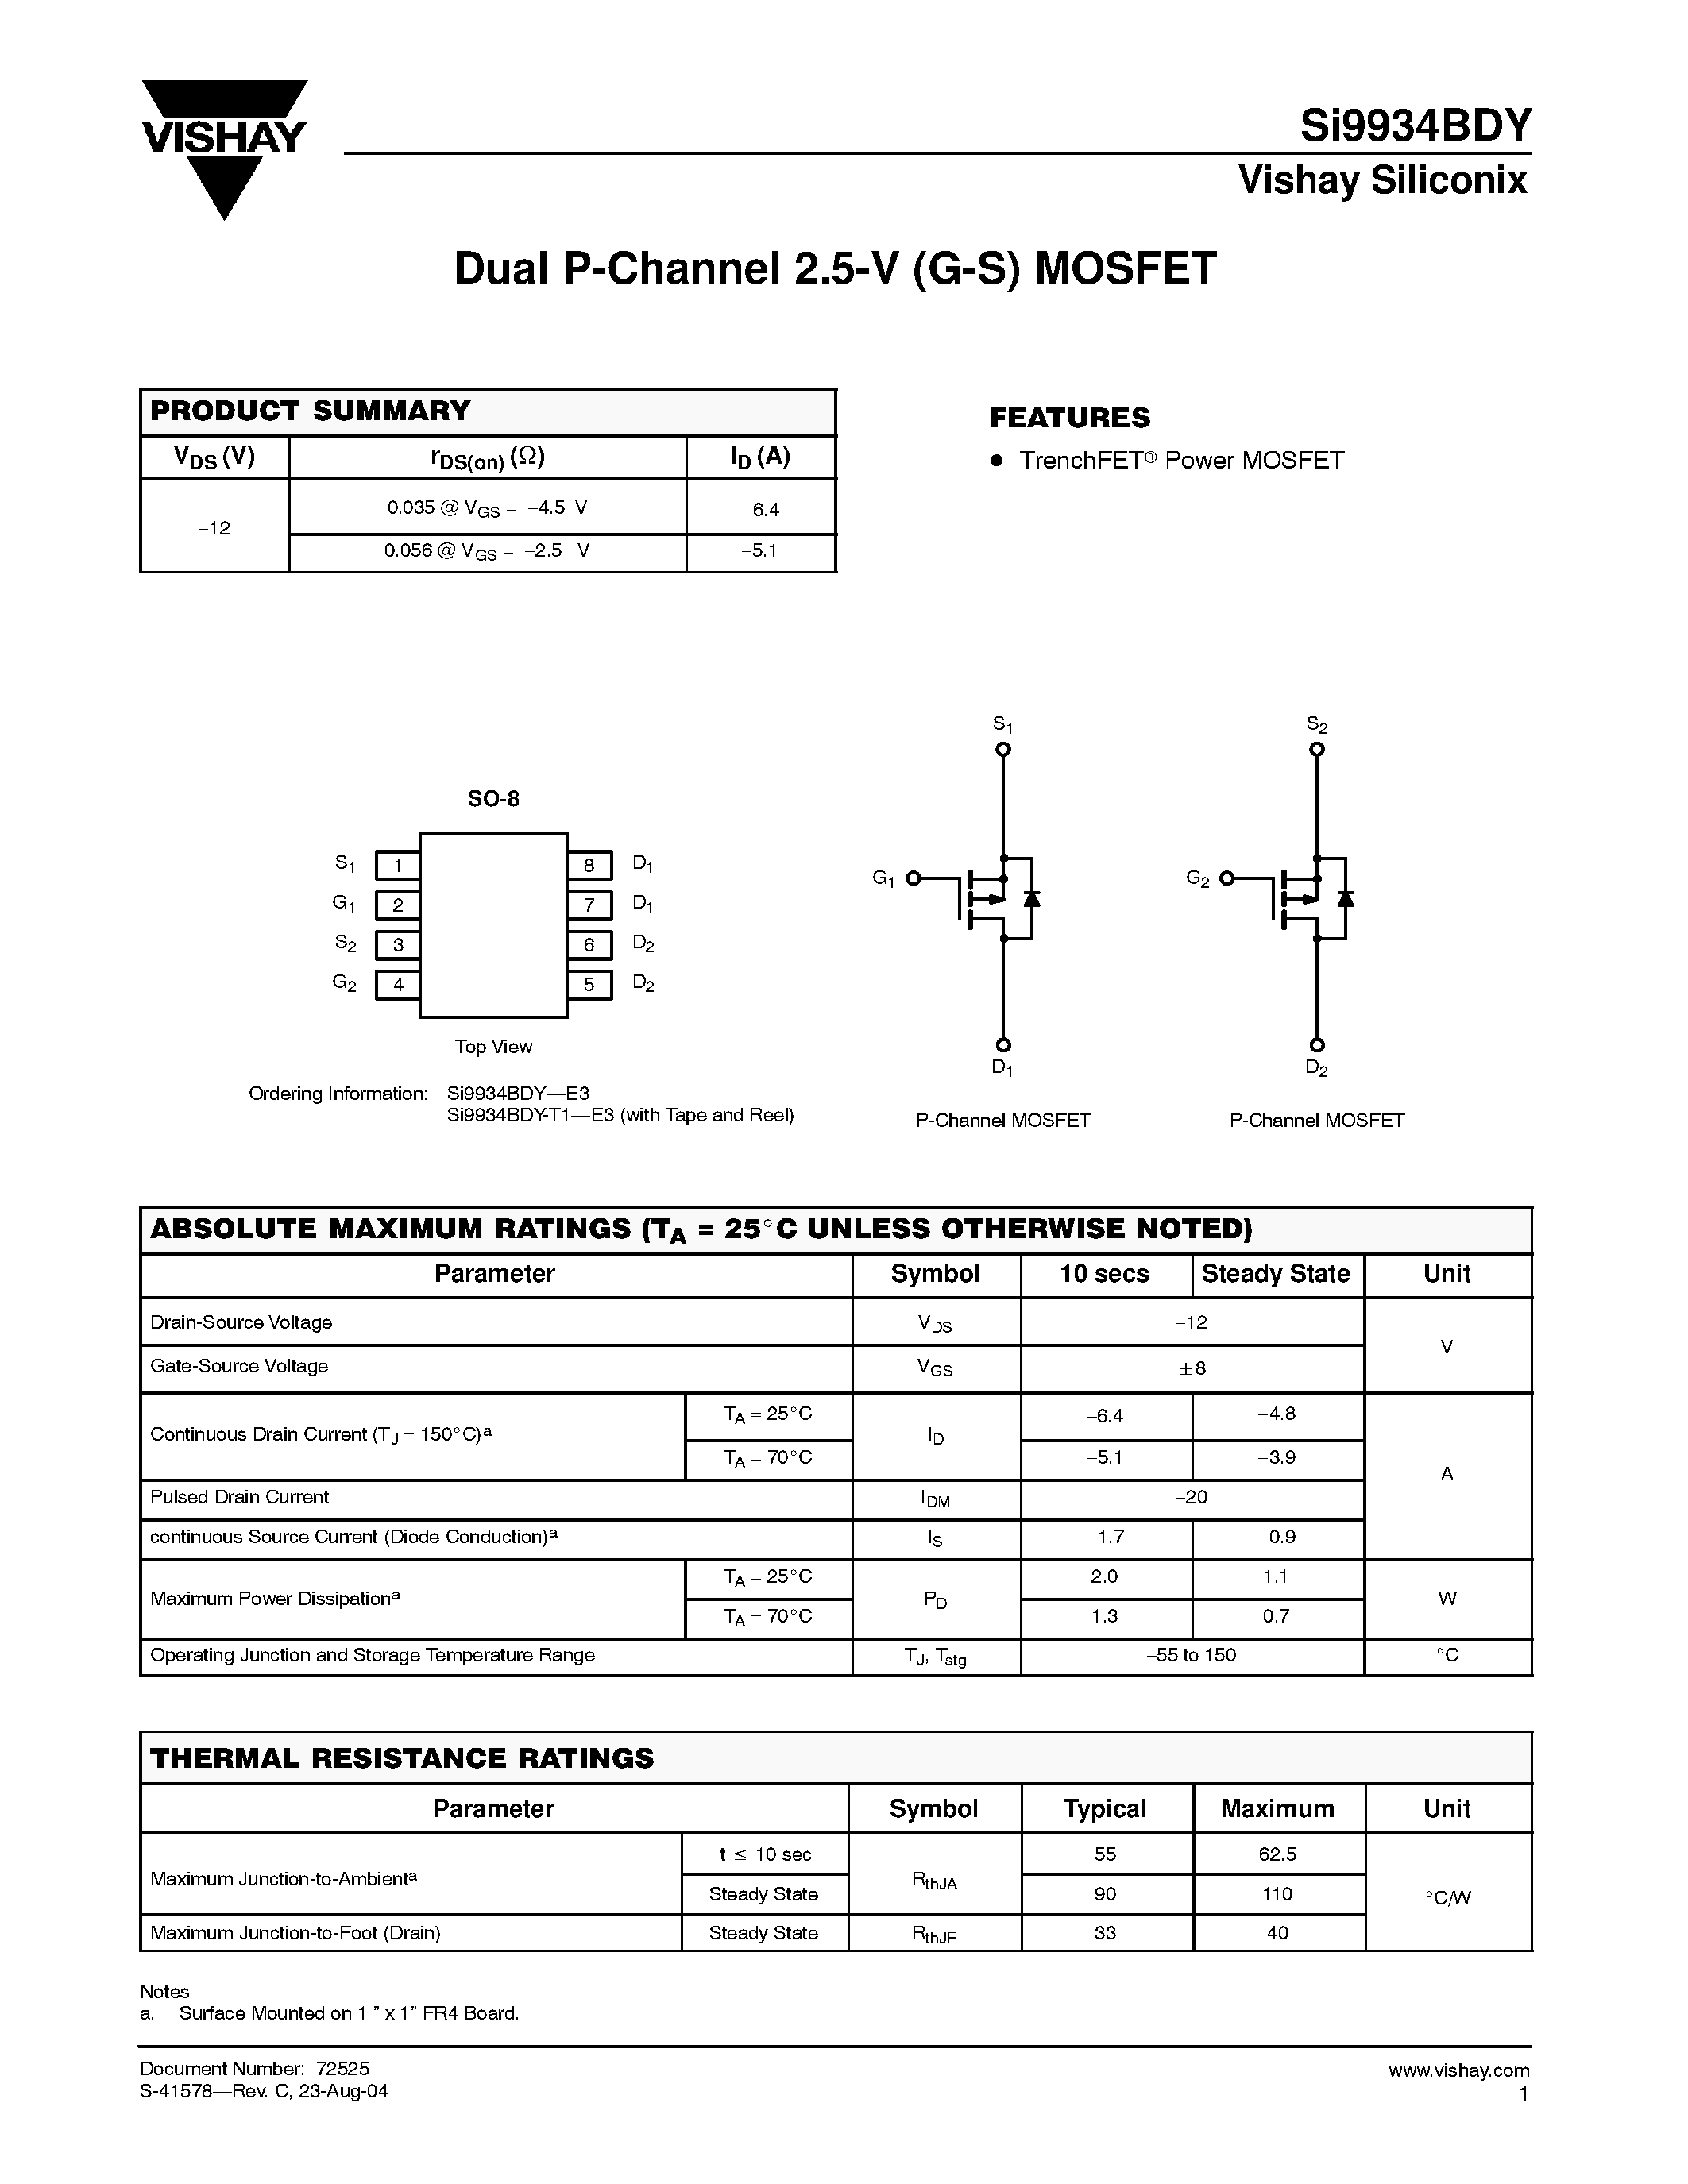 Datasheet SI9934BDY-T1-E3 - Dual P-Channel 2.5-V (G-S) MOSFET page 1